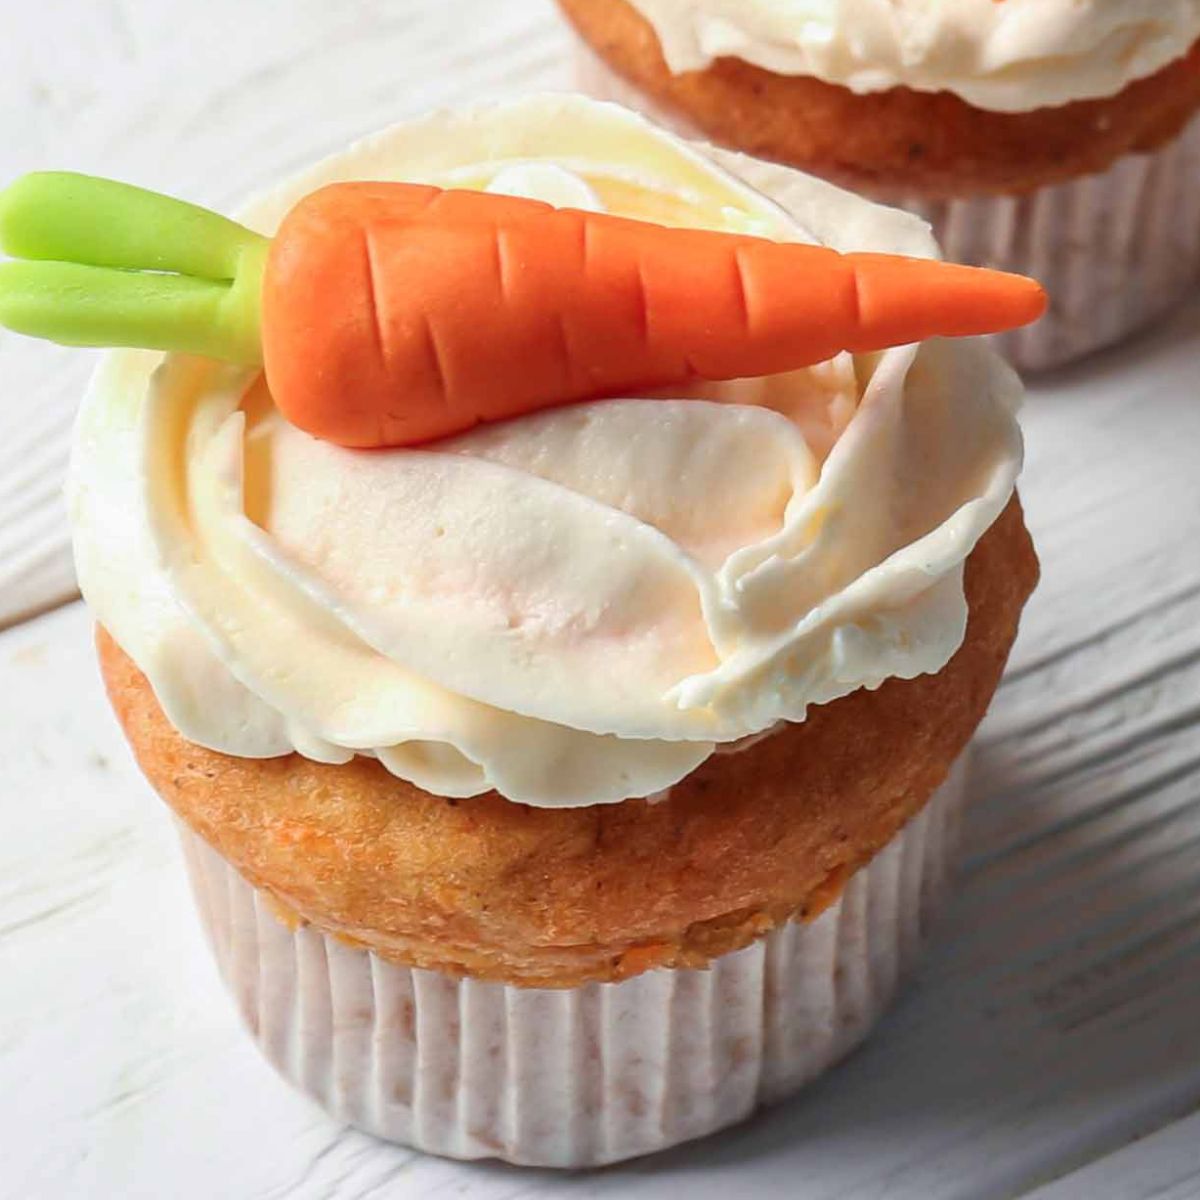 Carrot Banana Muffins with Quark Frosting